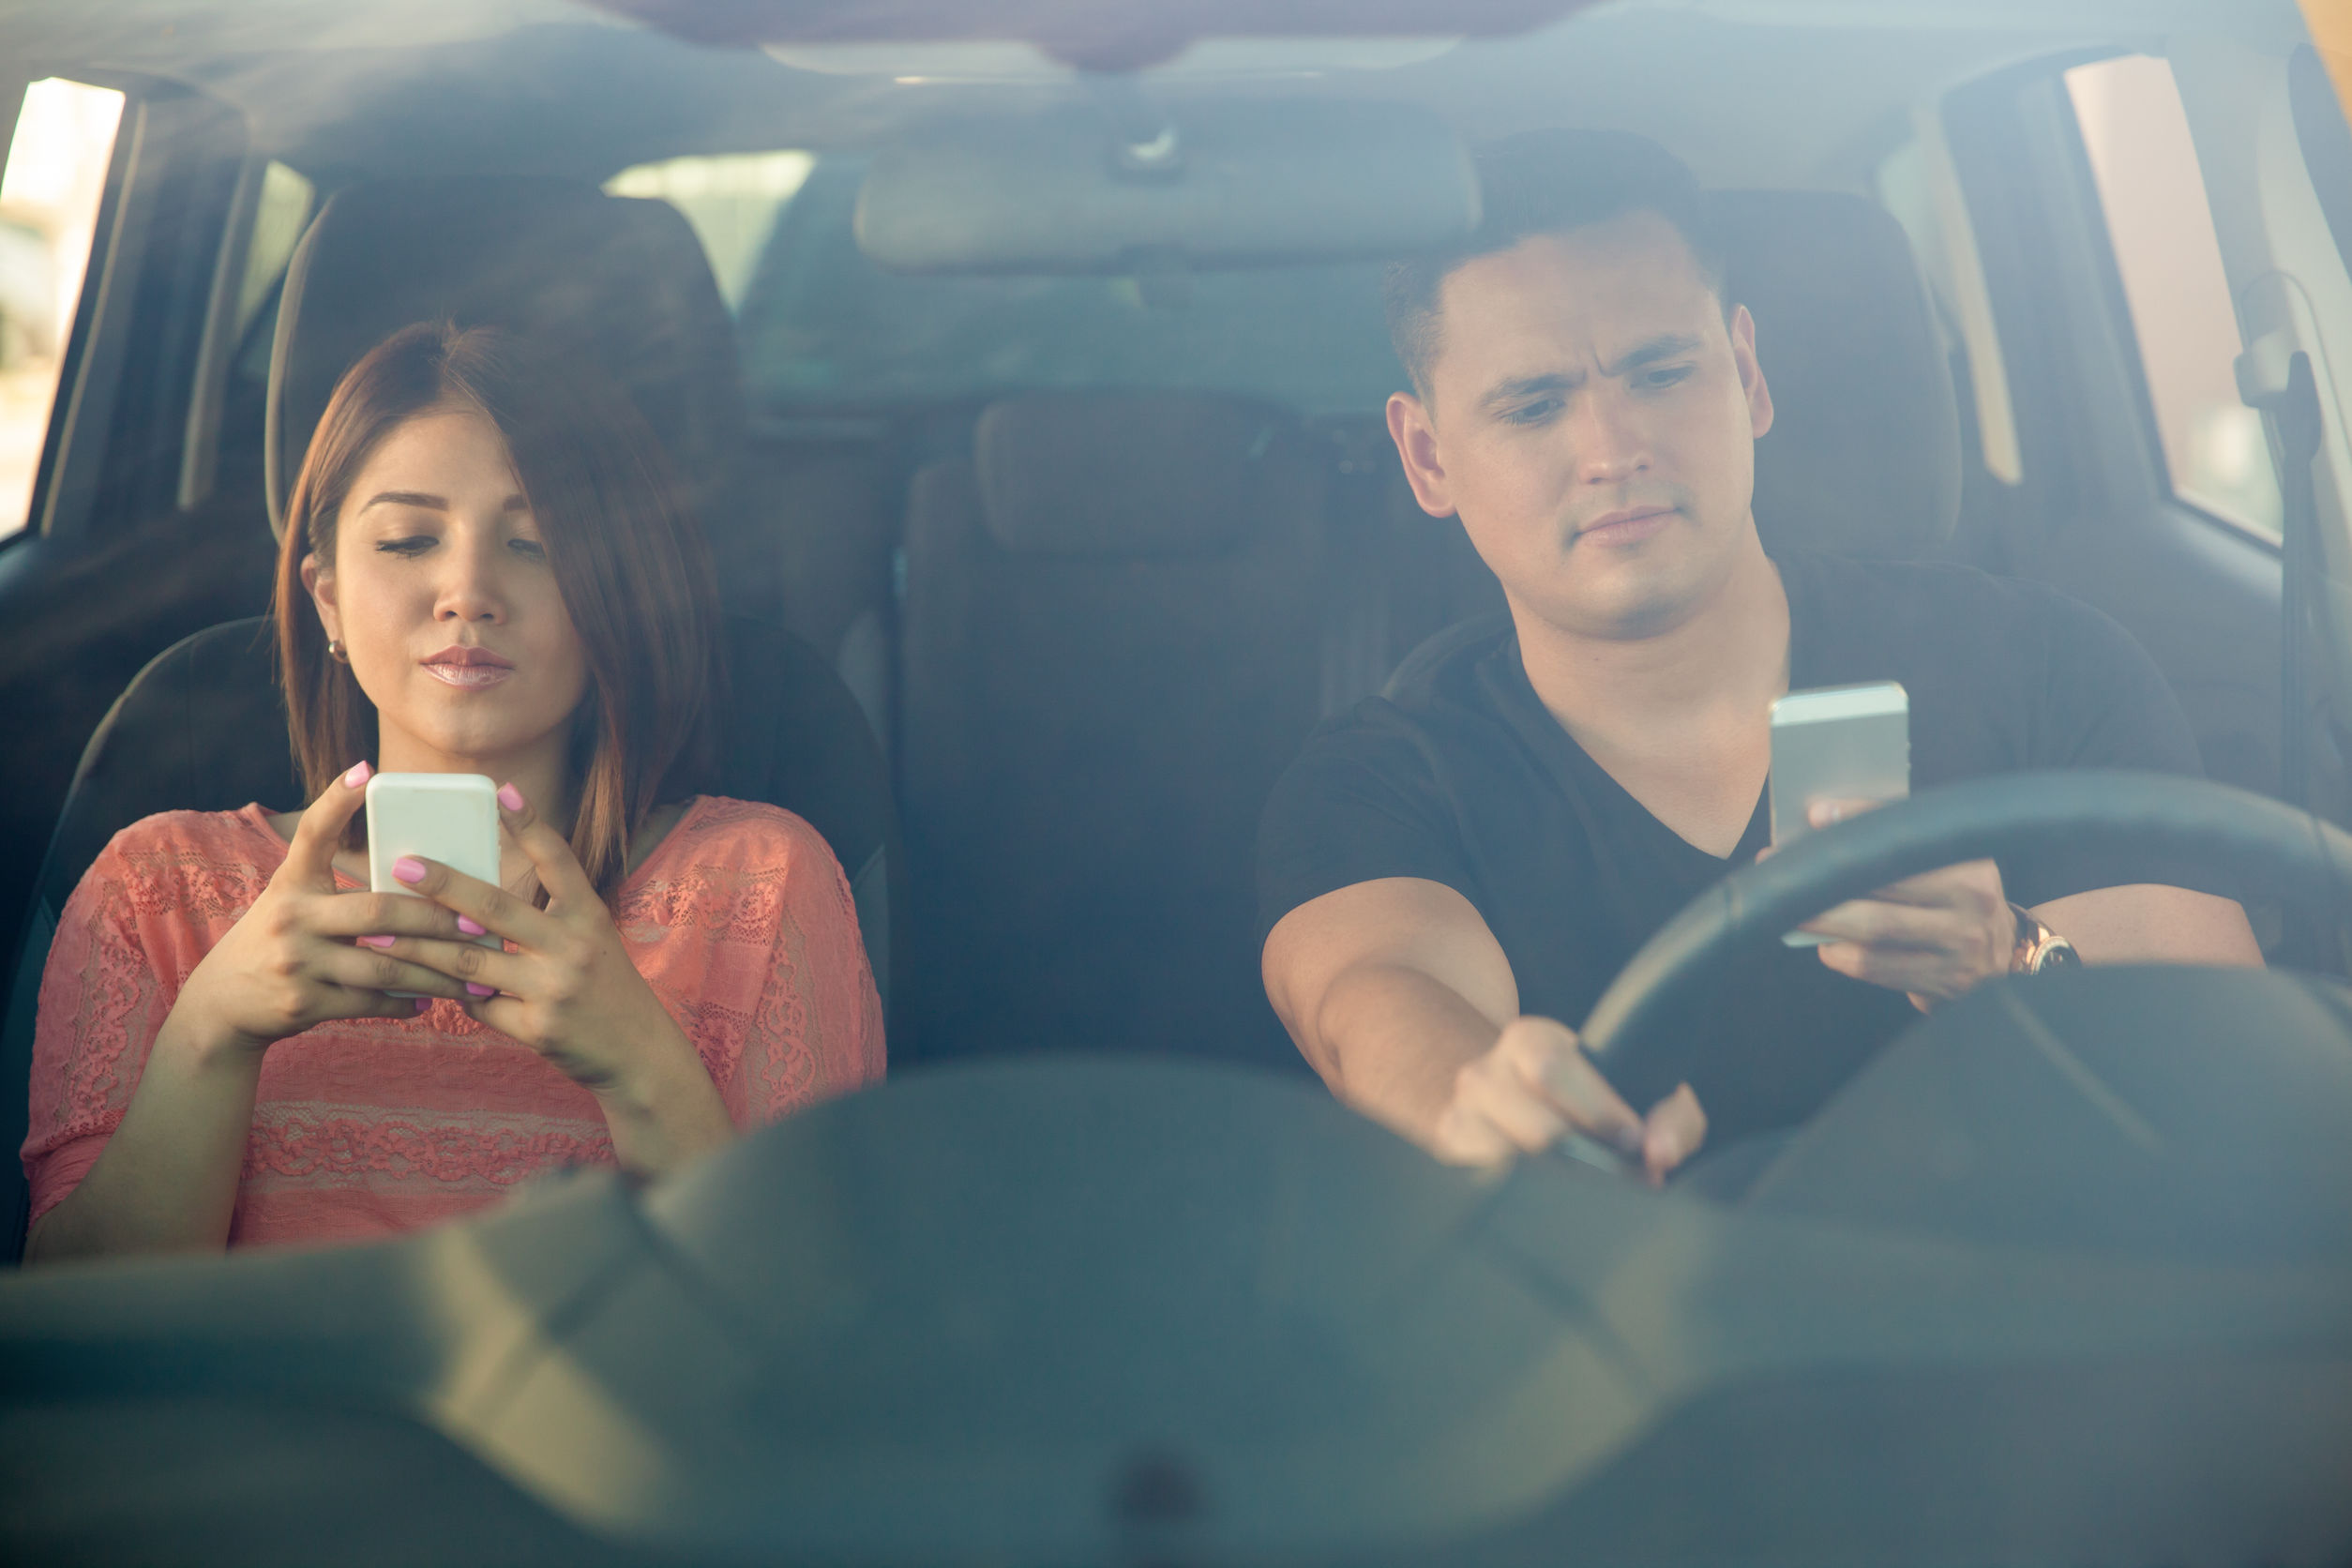 Distracted Driving Citations Surge Despite Our Efforts To Warn The Public